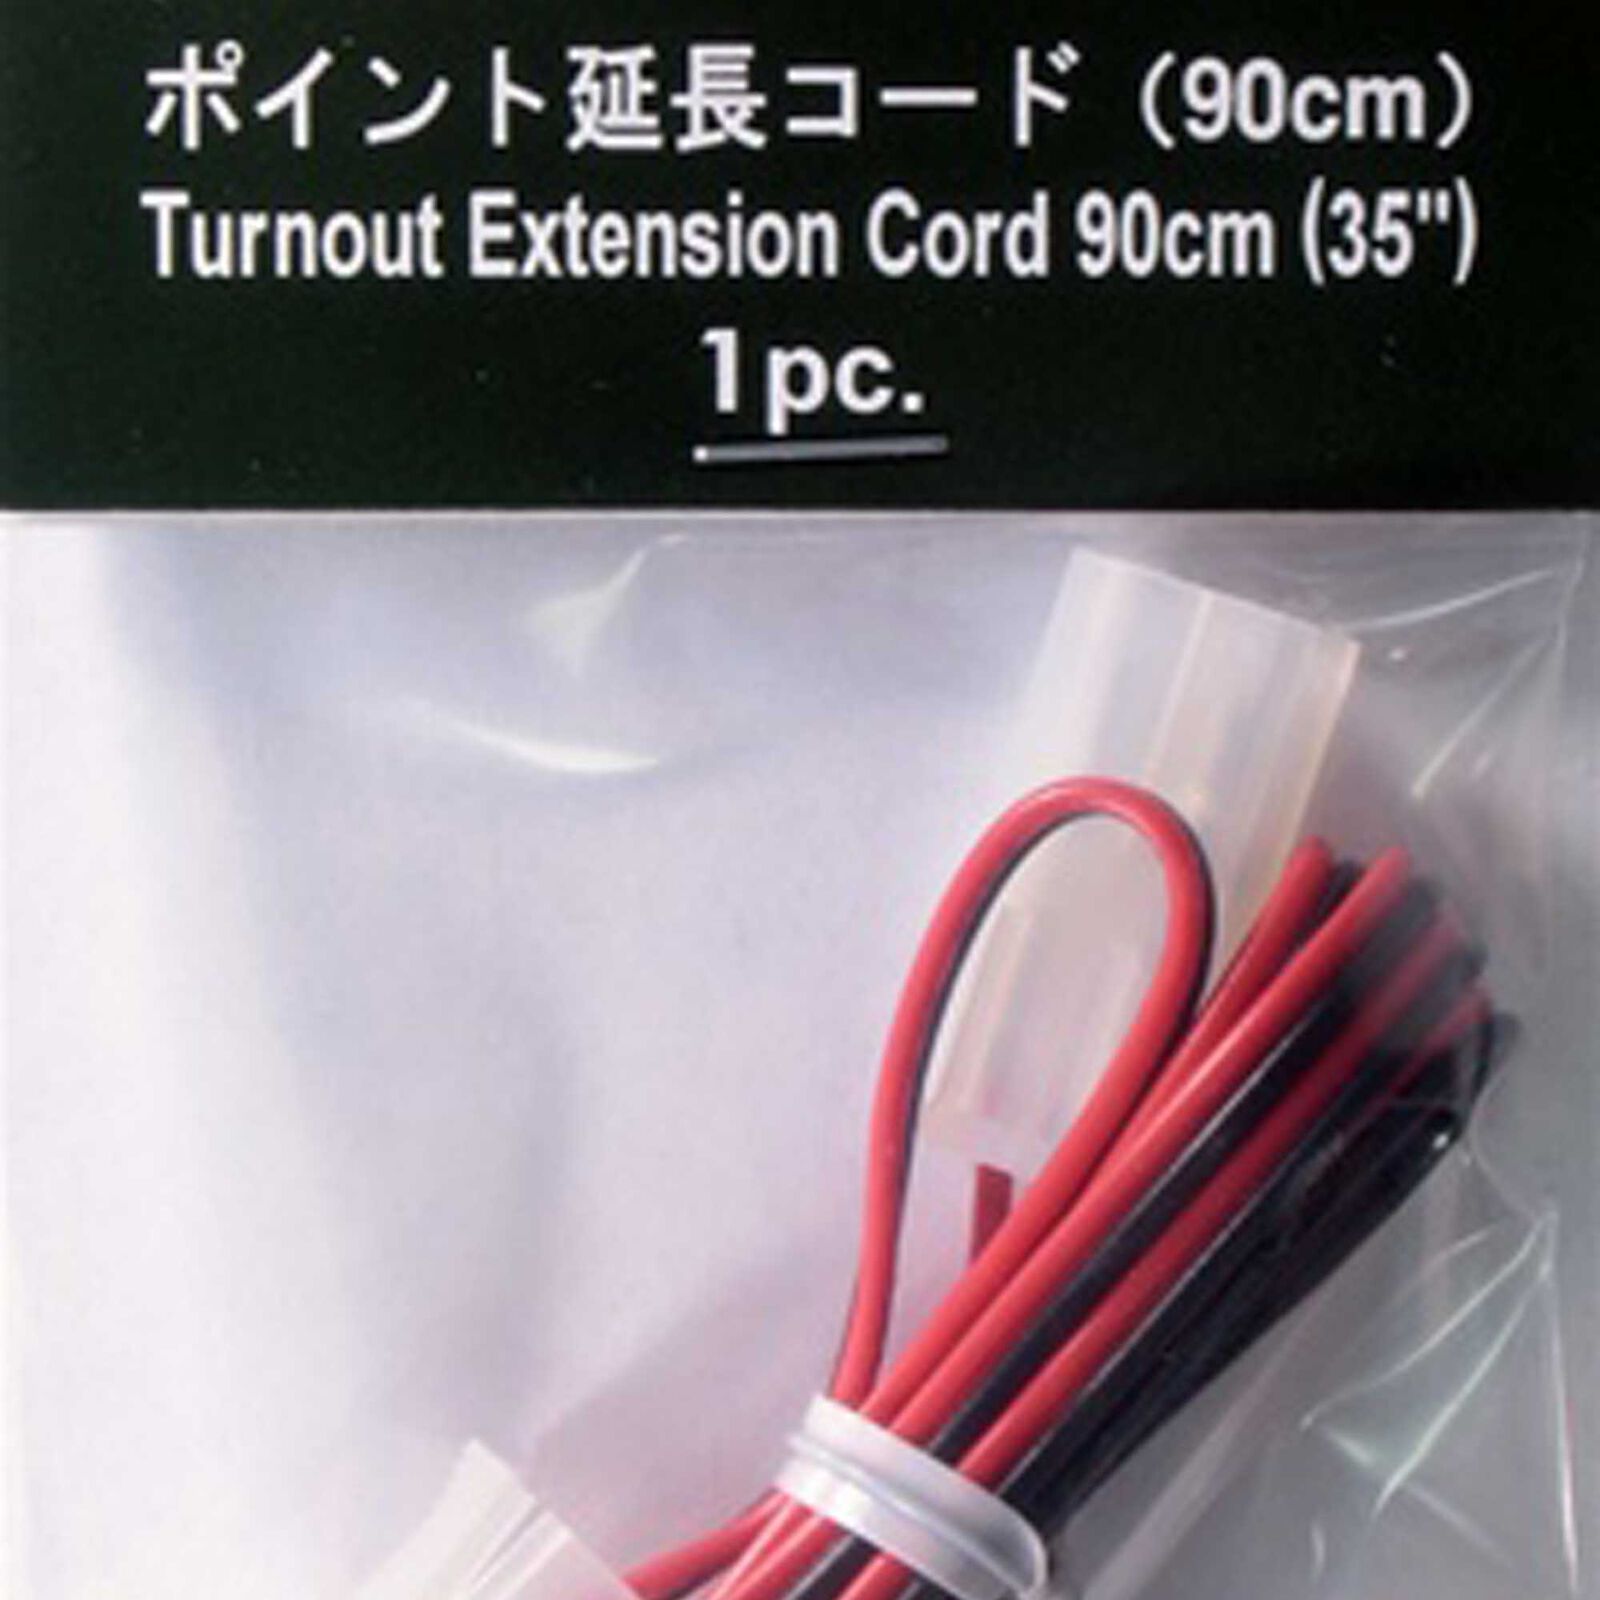 35" Extension Cord, Turnout